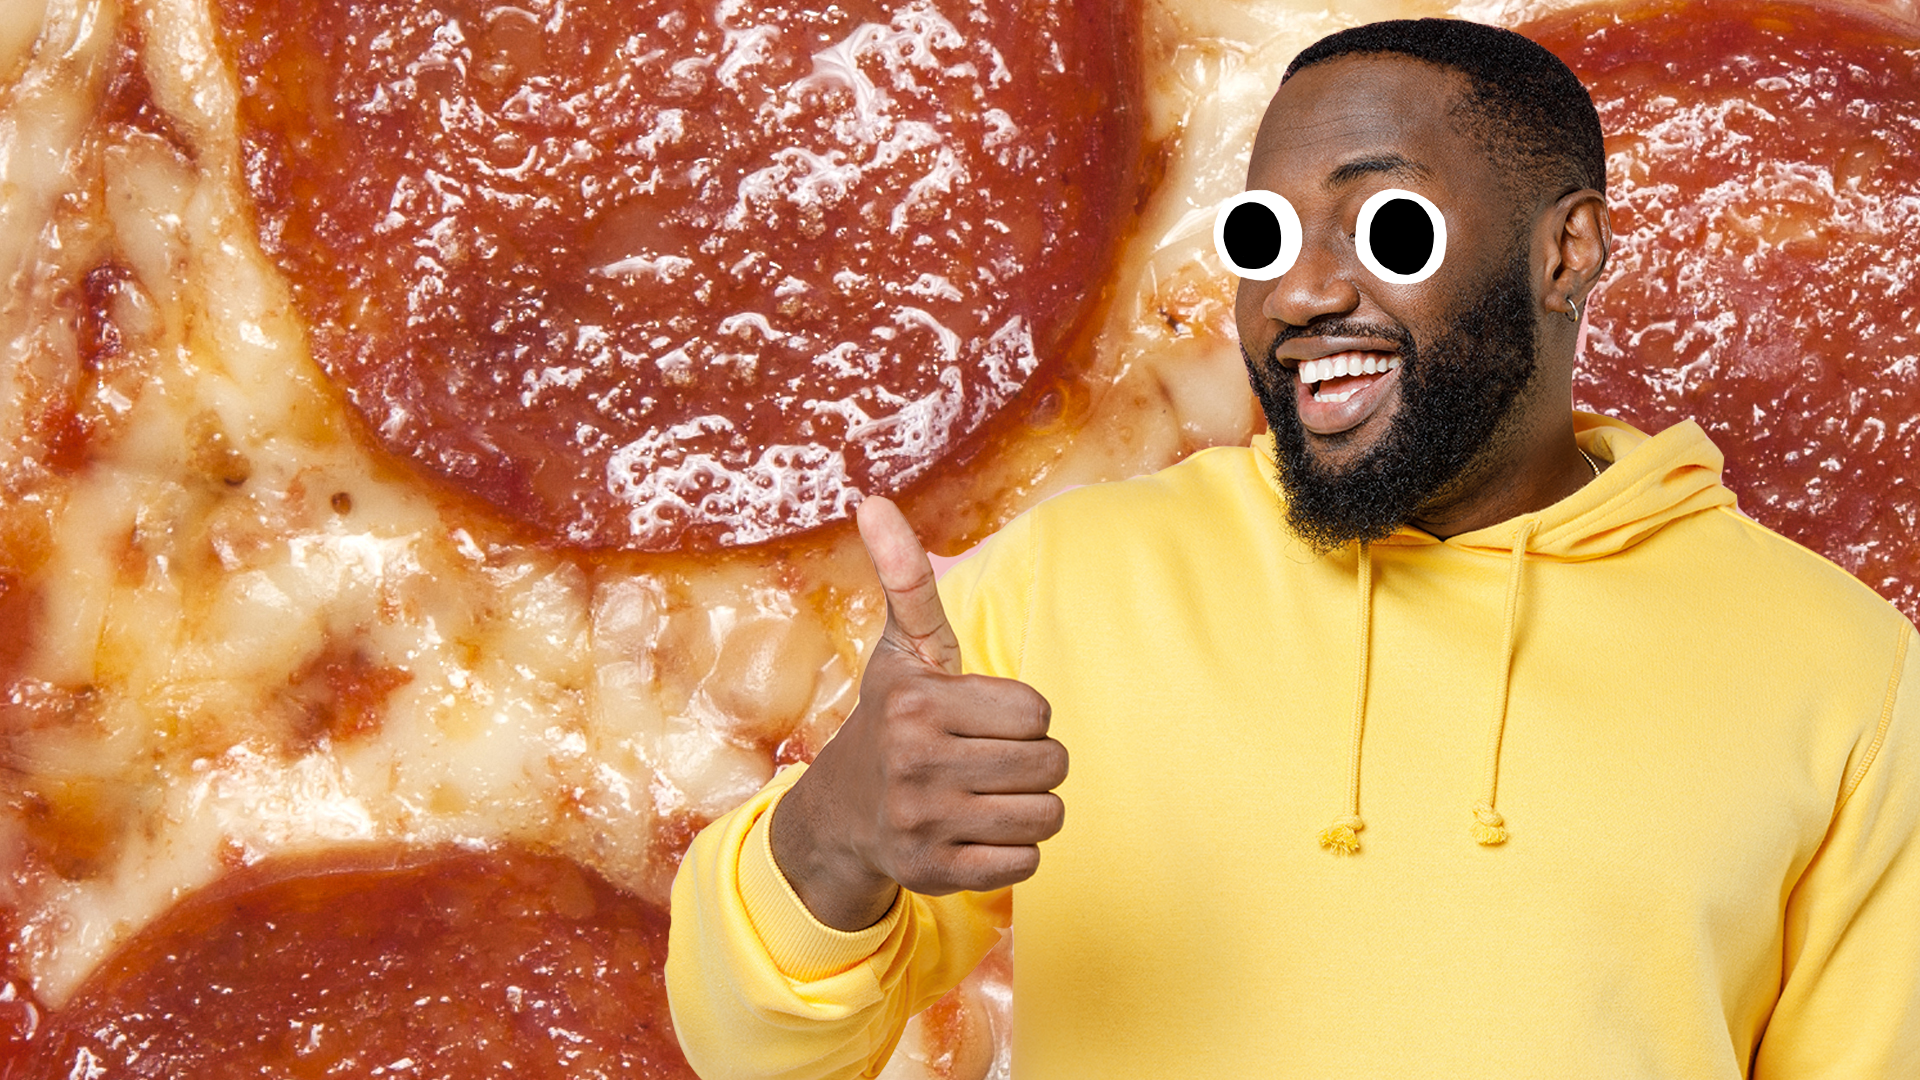 Guy giving thumbs up on pizza background